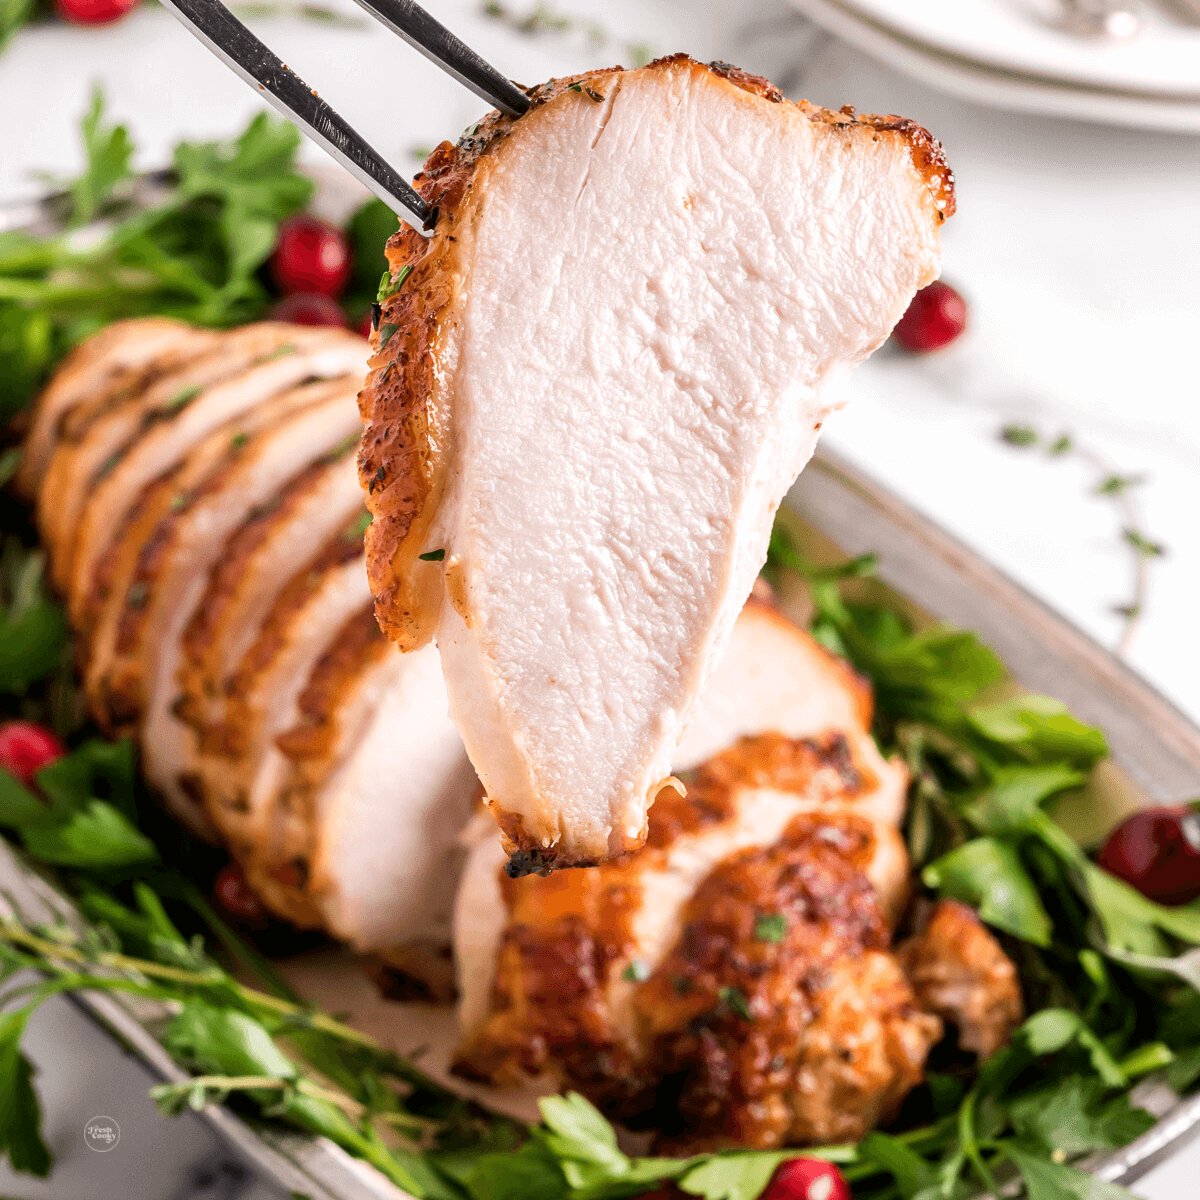 Air Fryer Turkey Breast • Love From The Oven